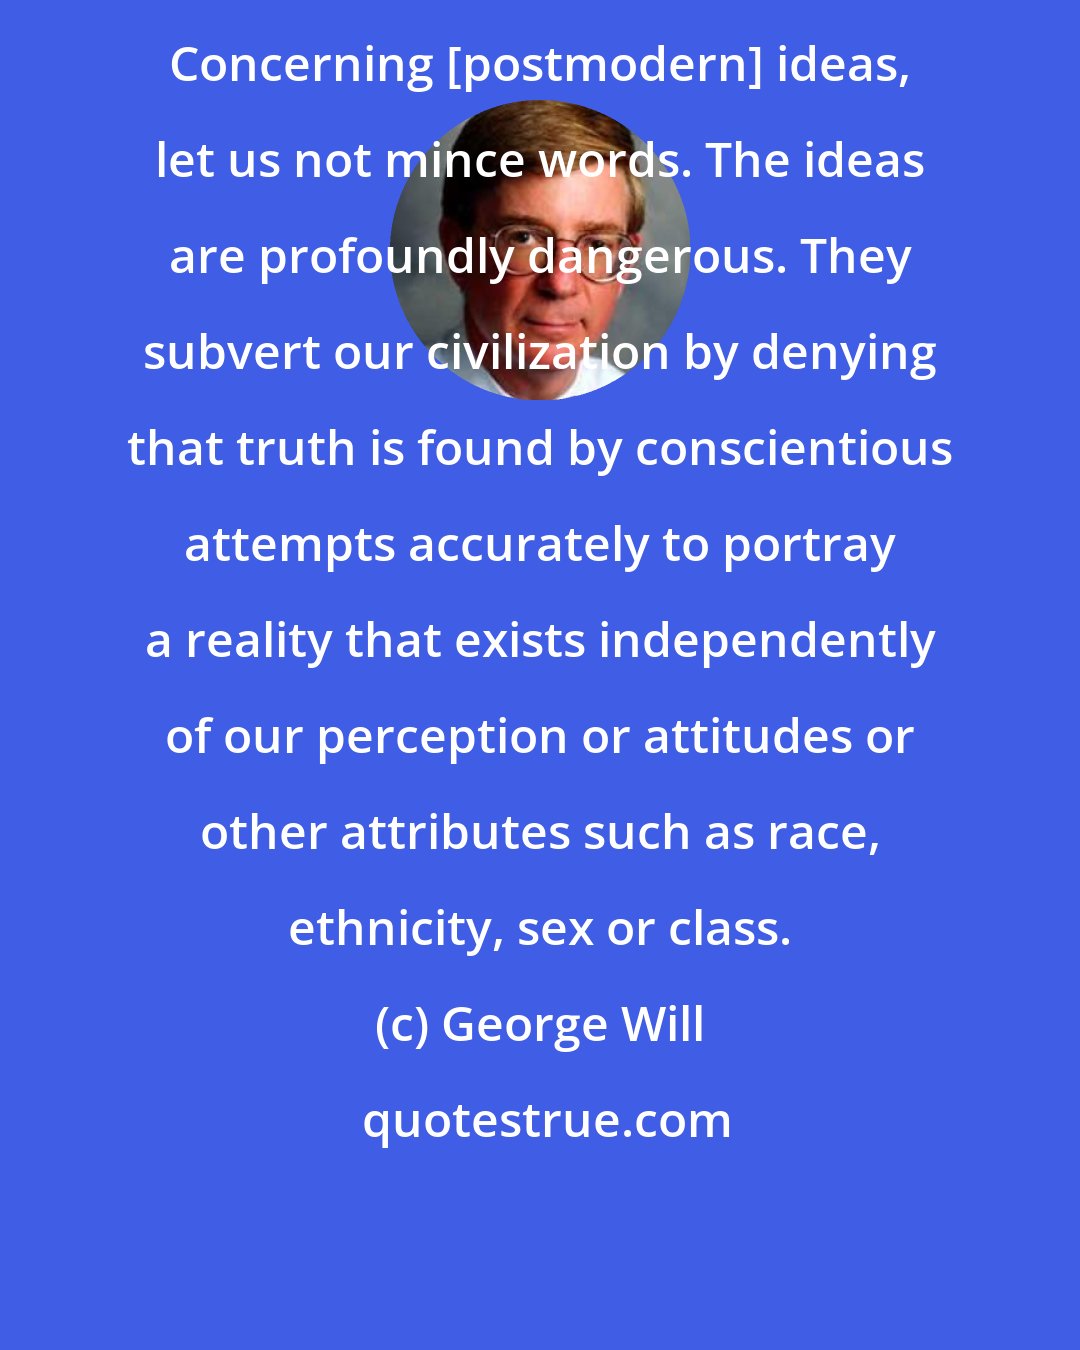 George Will: Concerning [postmodern] ideas, let us not mince words. The ideas are profoundly dangerous. They subvert our civilization by denying that truth is found by conscientious attempts accurately to portray a reality that exists independently of our perception or attitudes or other attributes such as race, ethnicity, sex or class.